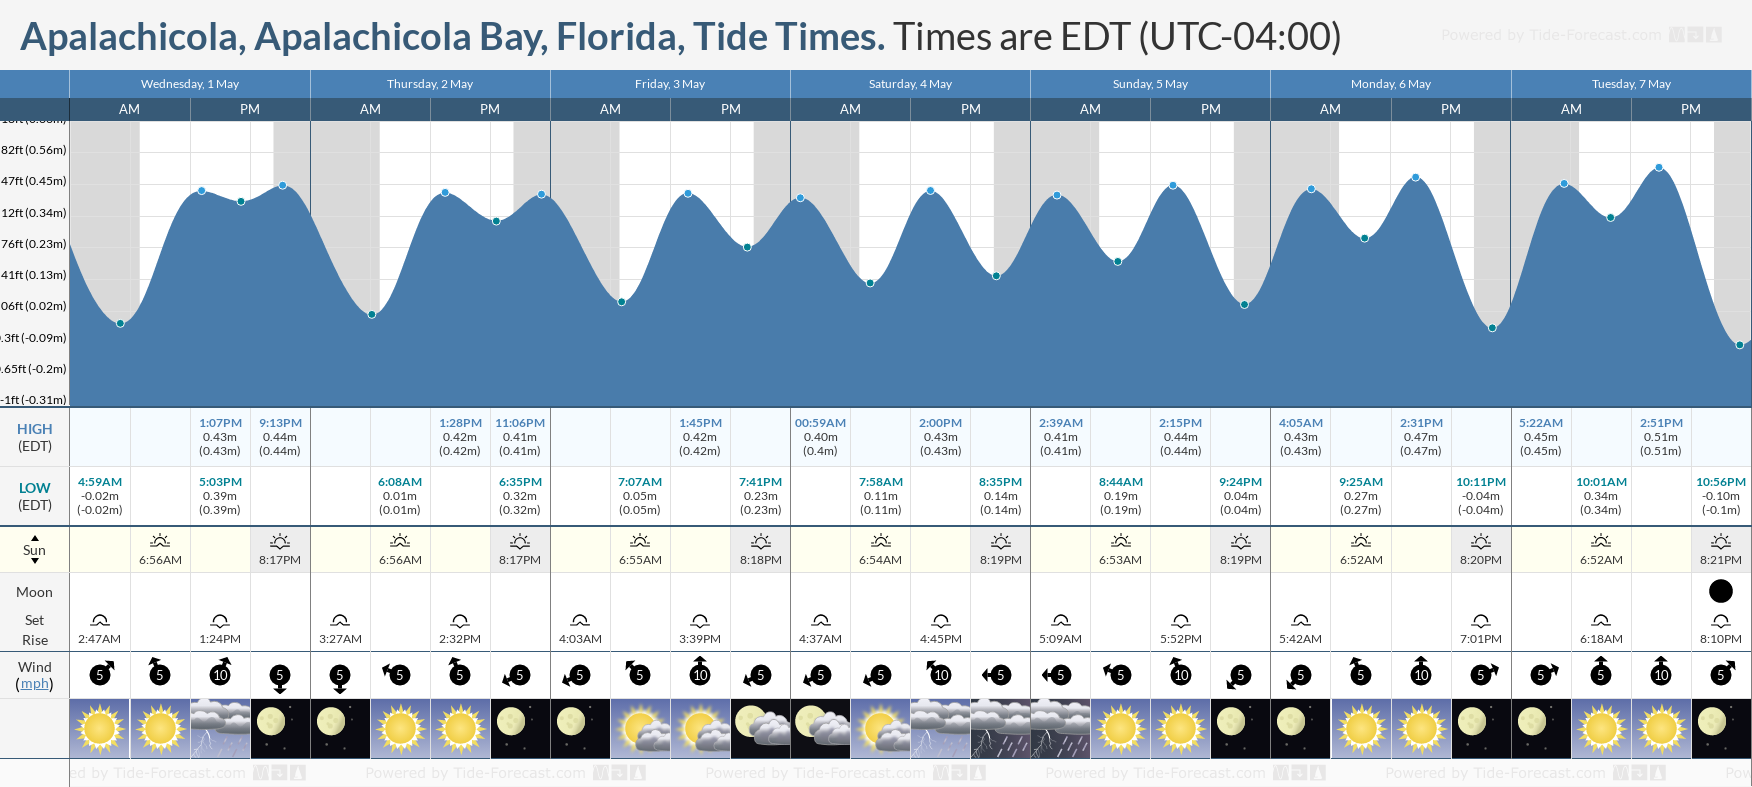 Apalachicola, Apalachicola Bay, Florida Tide Chart including high and low tide times for the next 7 days